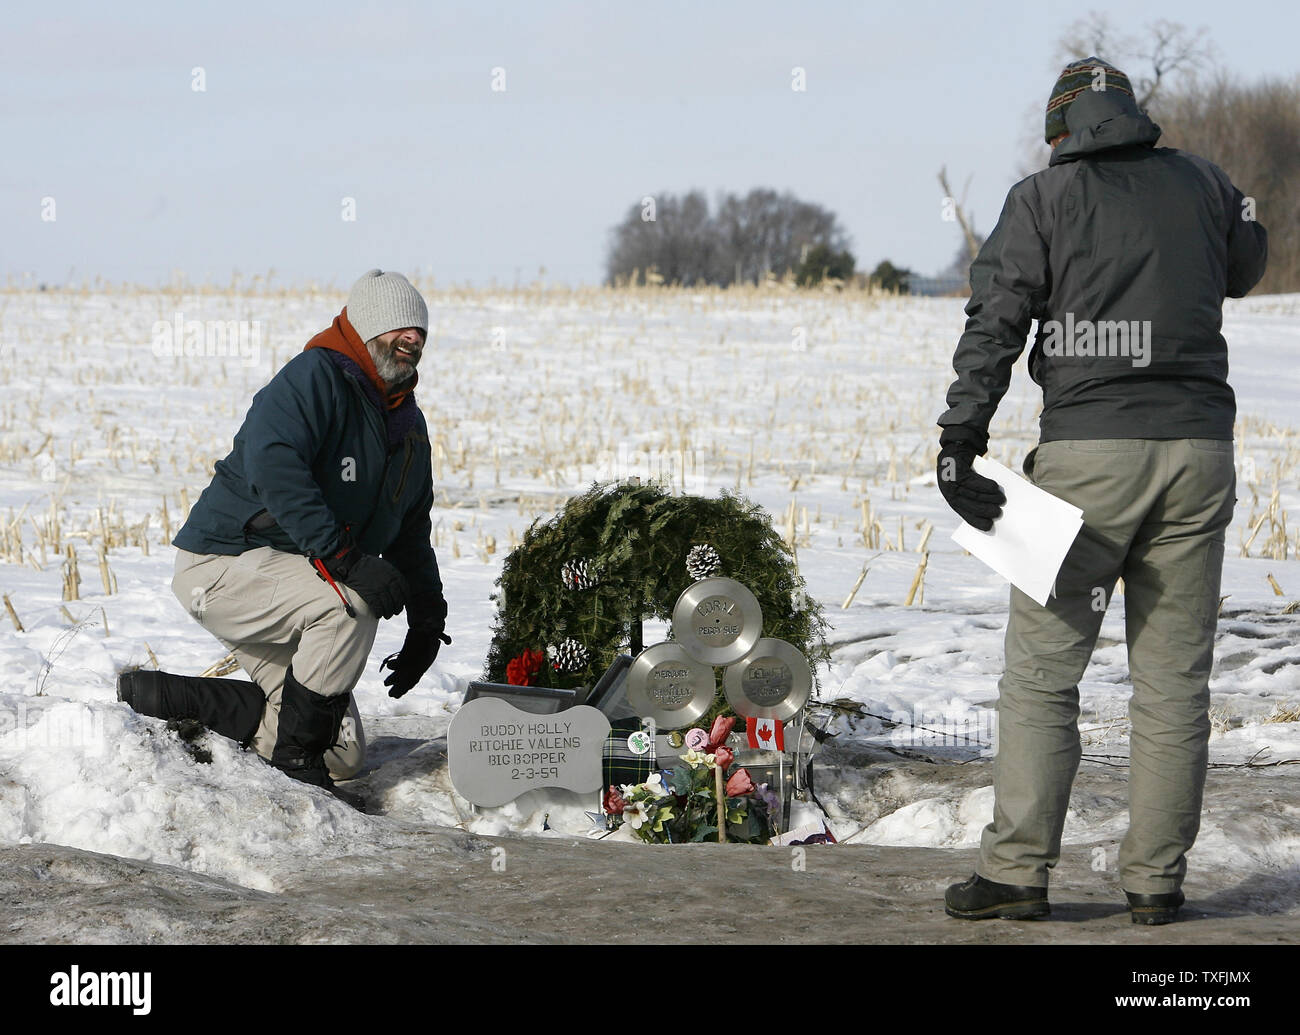 Mike Jones (R) and his dad Tom, both of Boston, take photos at the site of the plane crash that killed Buddy Holly, Ritchie Valens and J. P. 'The Big Bopper' Richardson near Clear Lake, Iowa on February 2, 2009. Singer Don McLean coined the phrase 'the day the music died' in his hit song American Pie referring to the death of the three rock 'n' roll pioneers in the early morning hours of February 3, 1959. Thousands of people descended upon Clear Lake to celebrate the 50th anniversary of 'the day the music died'.   (UPI Photo/Brian Kersey) Stock Photo